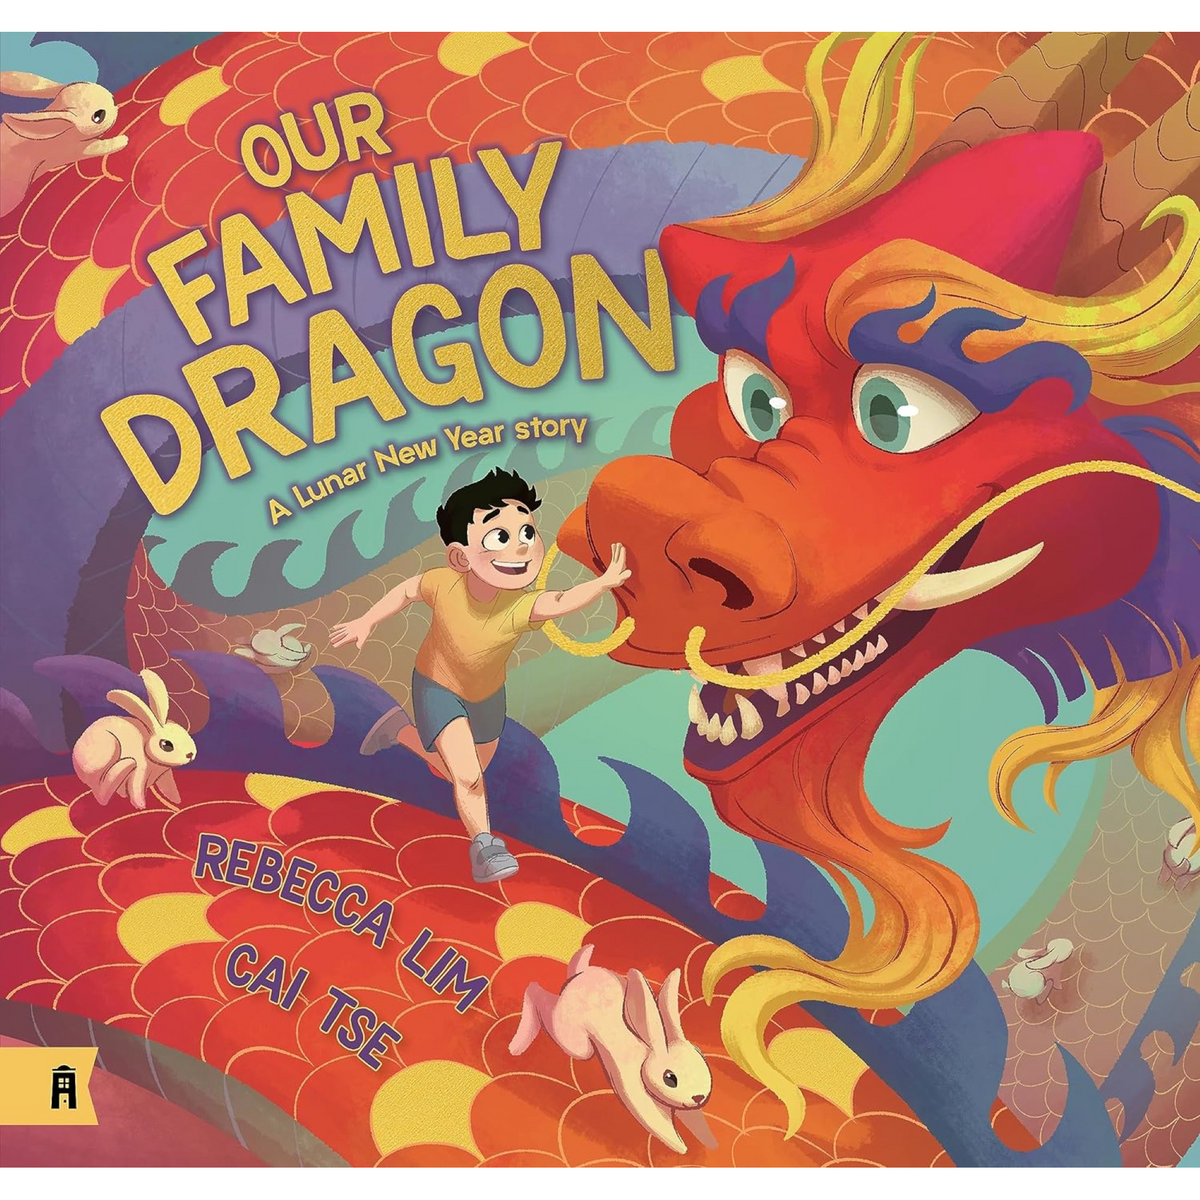 Our Family Dragon: A Lunar New Year Story